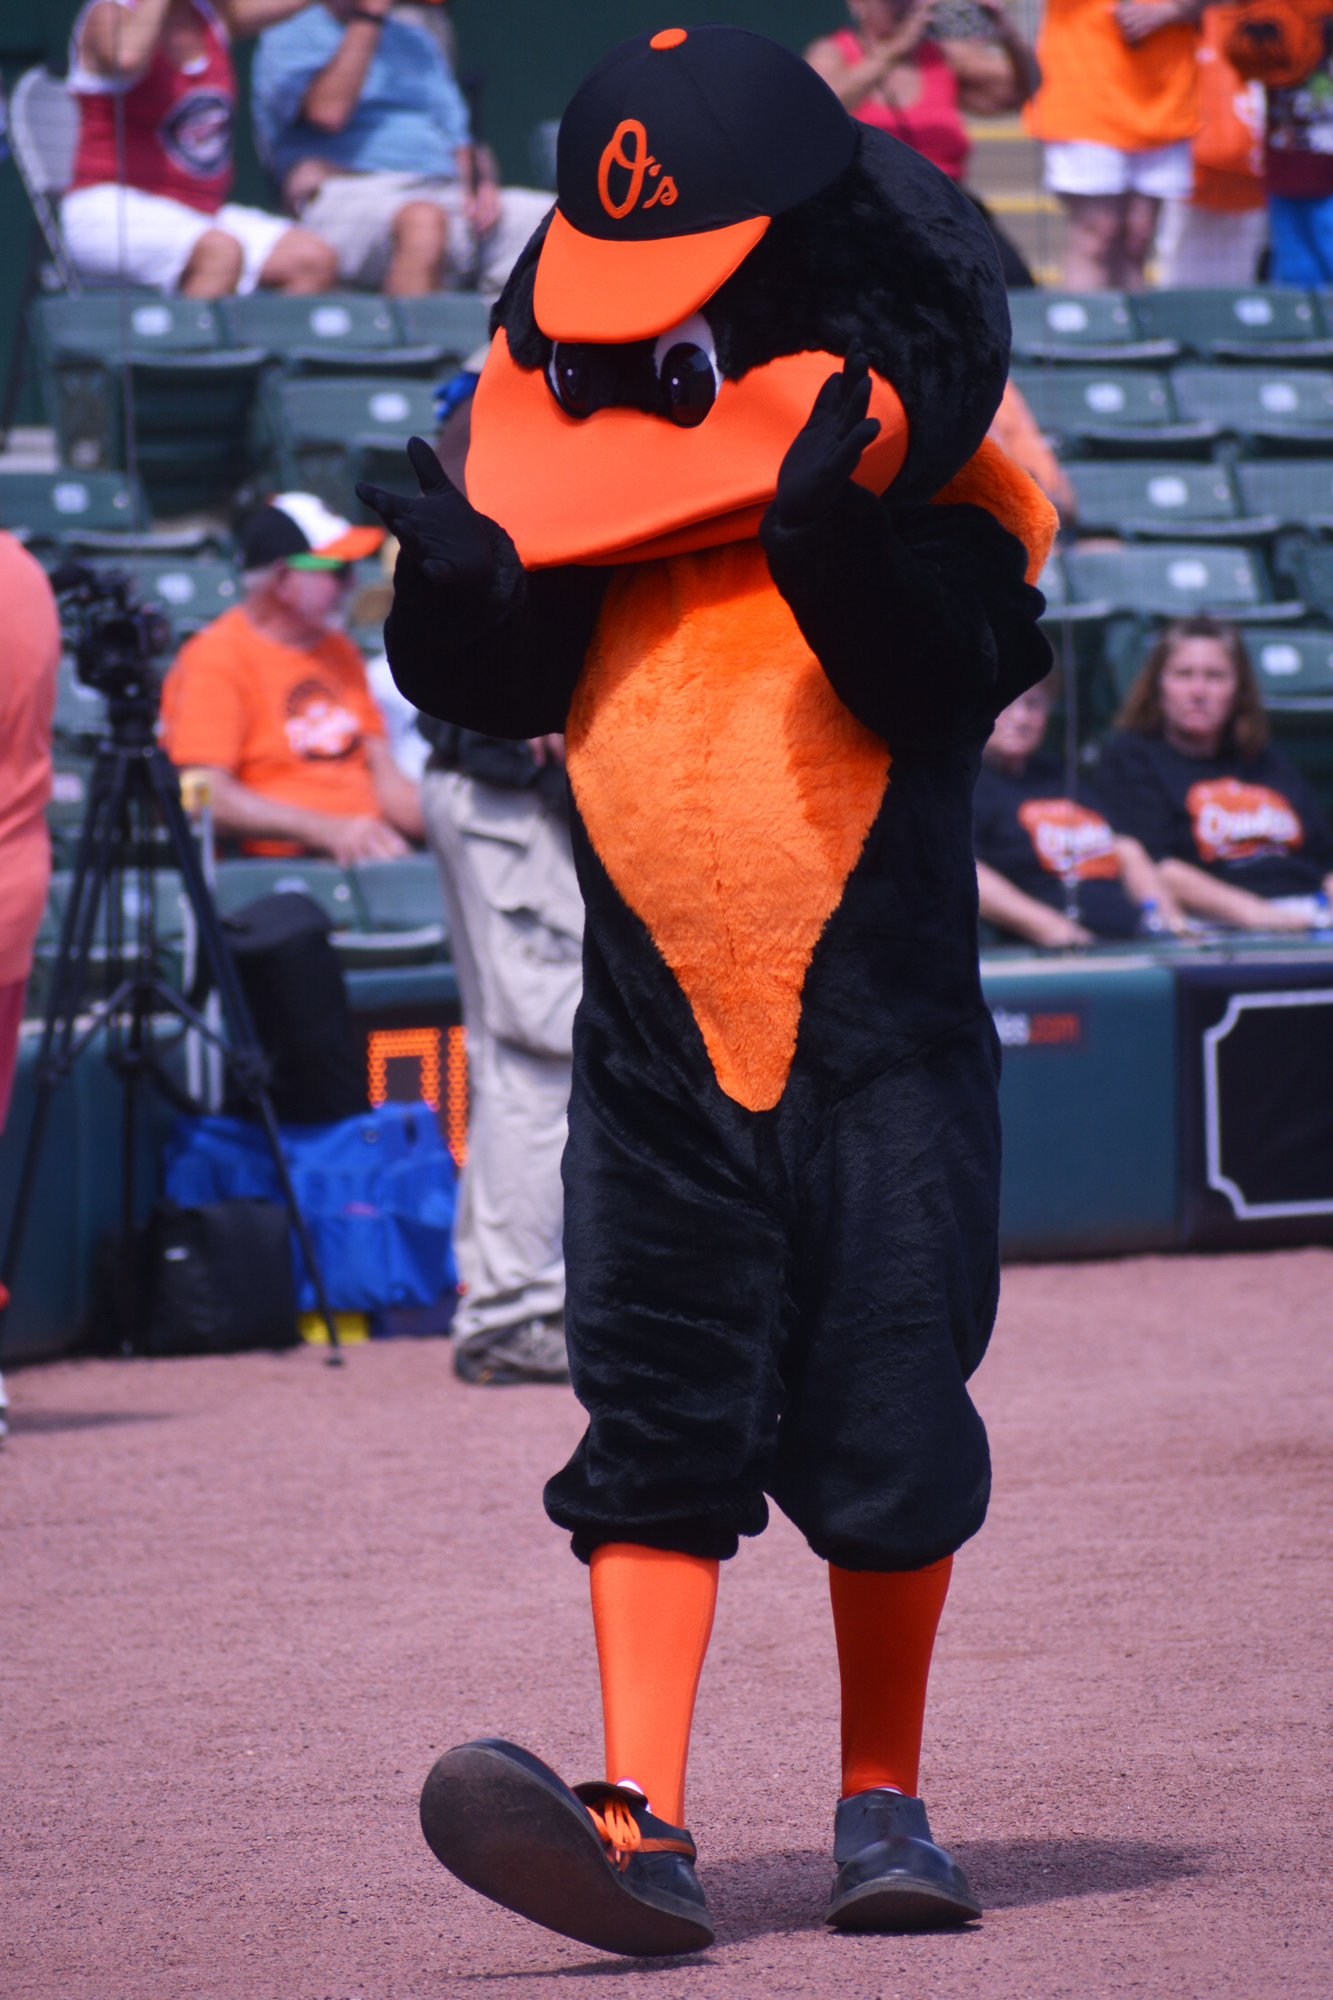 The Baltimore Orioles will begin minor league spring training workouts on March 10 and games on March 16.